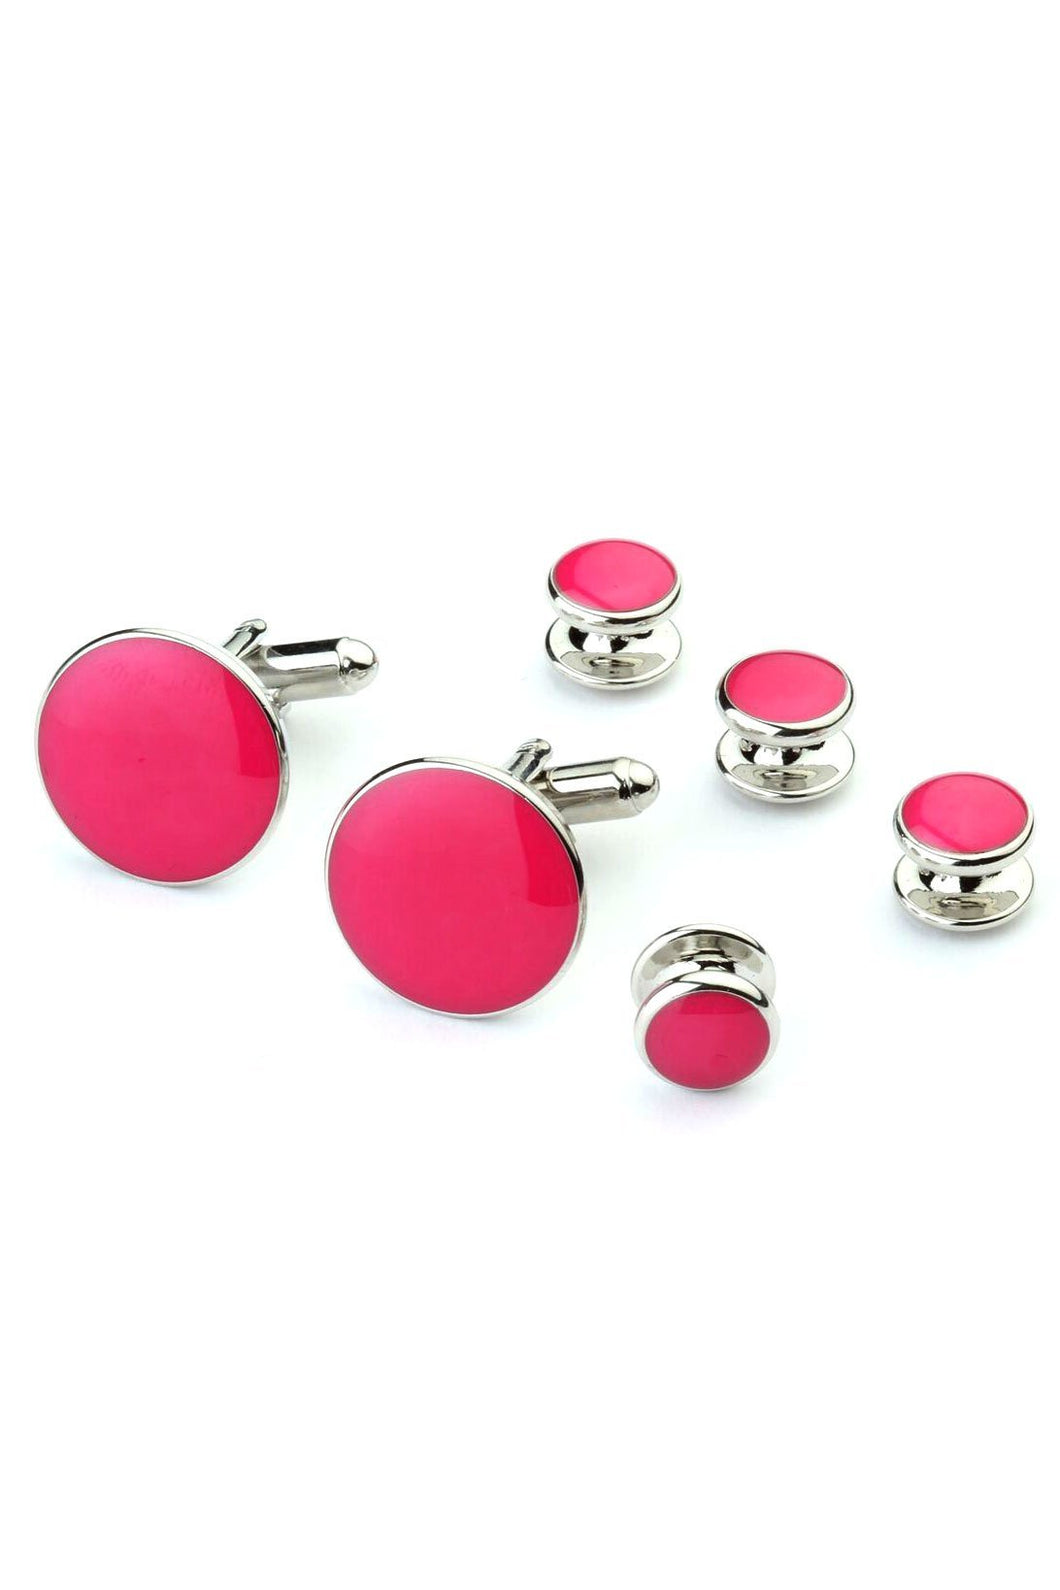 Cristoforo Cardi Pink with Silver Trim Studs and Cufflinks Set